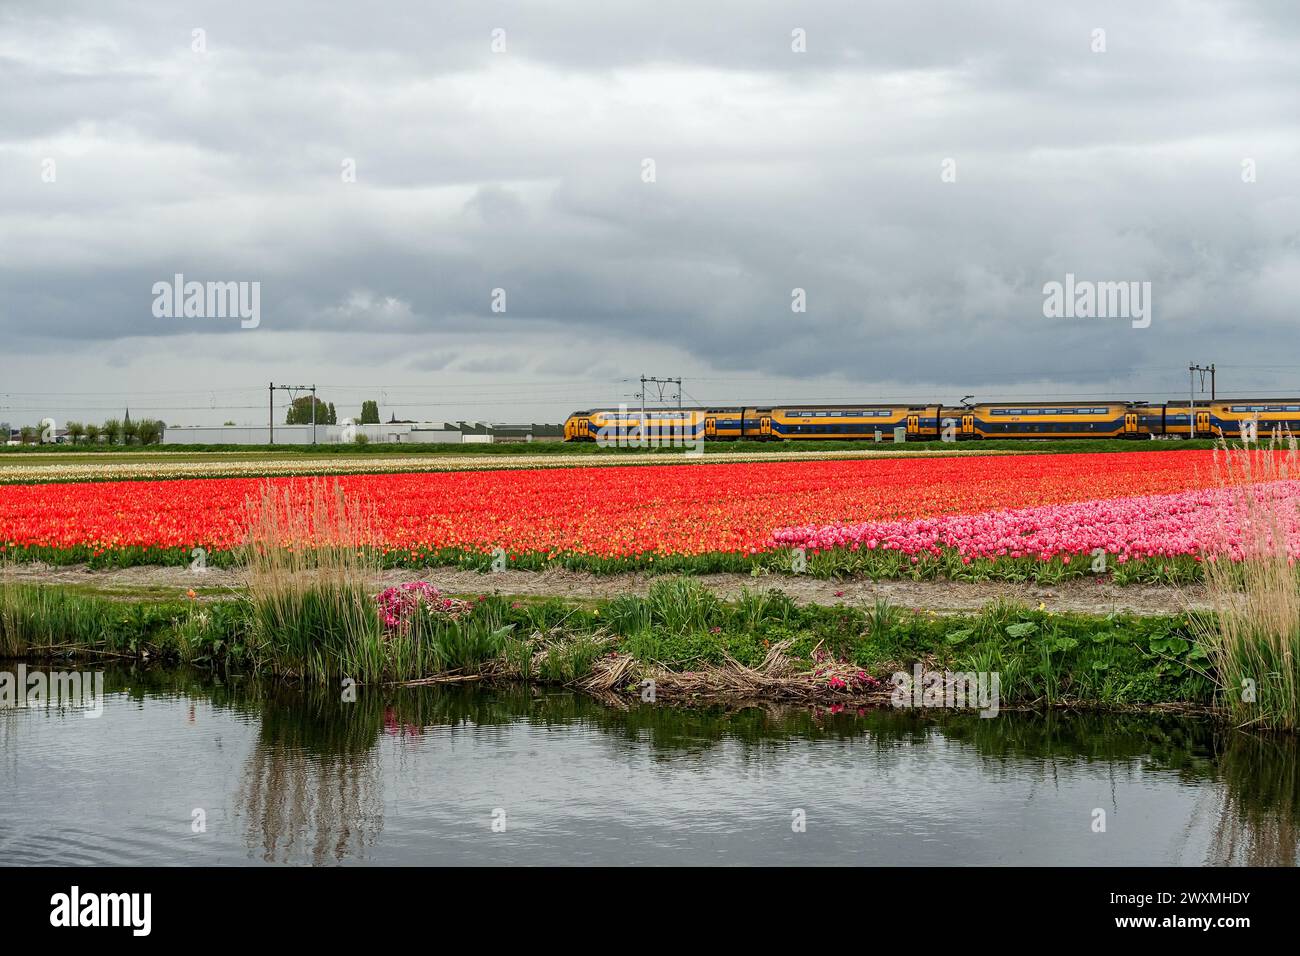 Colorful tulip fields with a passing NS train under a cloudy sky reflected in a water canal Stock Photo